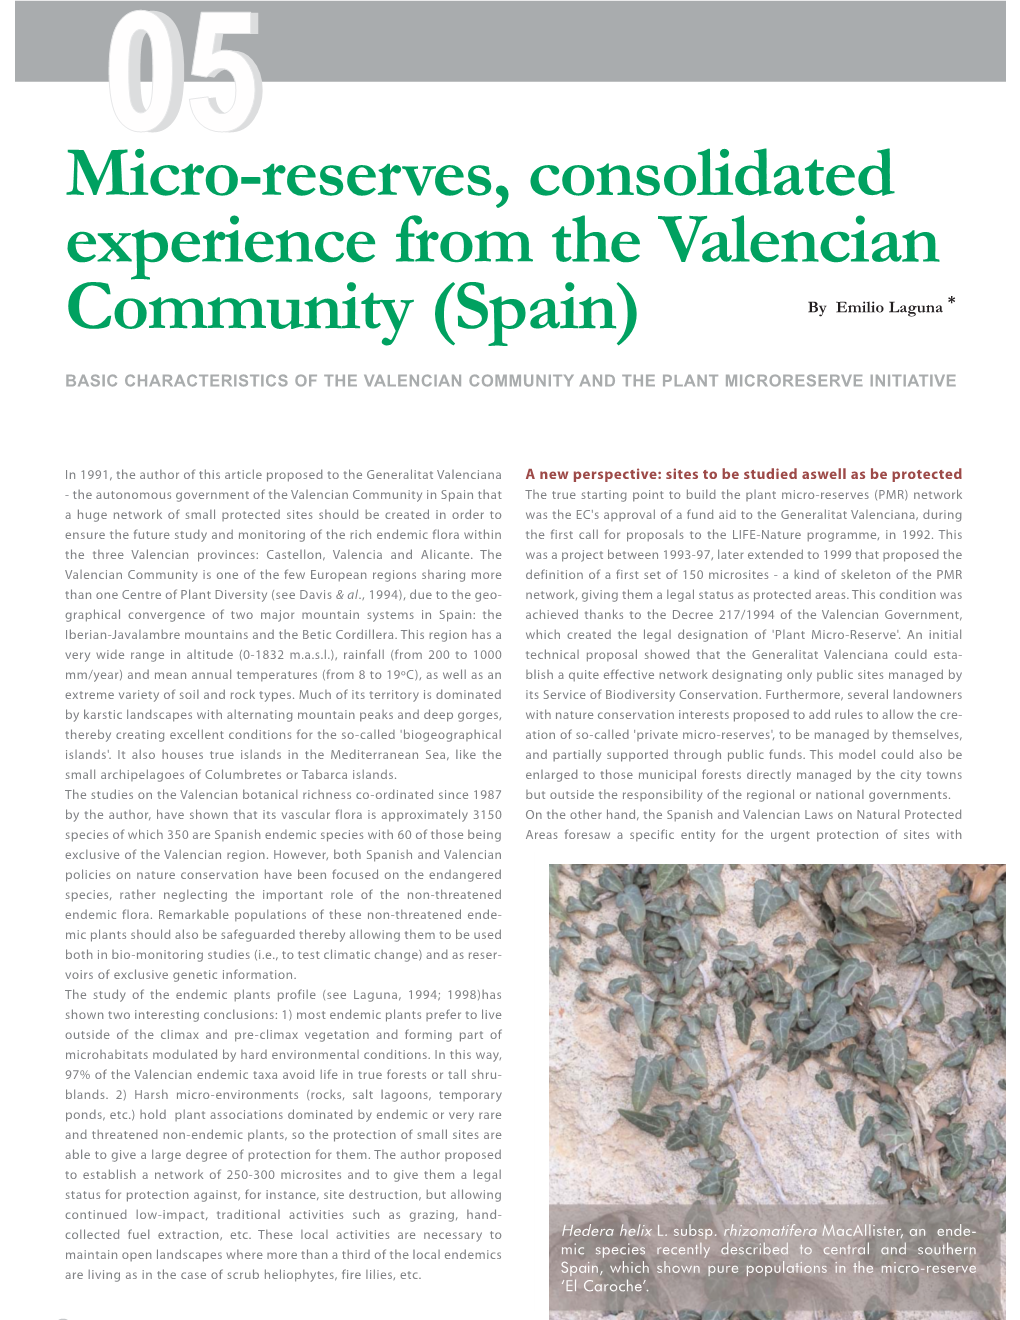 Micro-Reserves, Consolidated Experience from the Valencian Community (Spain) by Emilio Laguna *